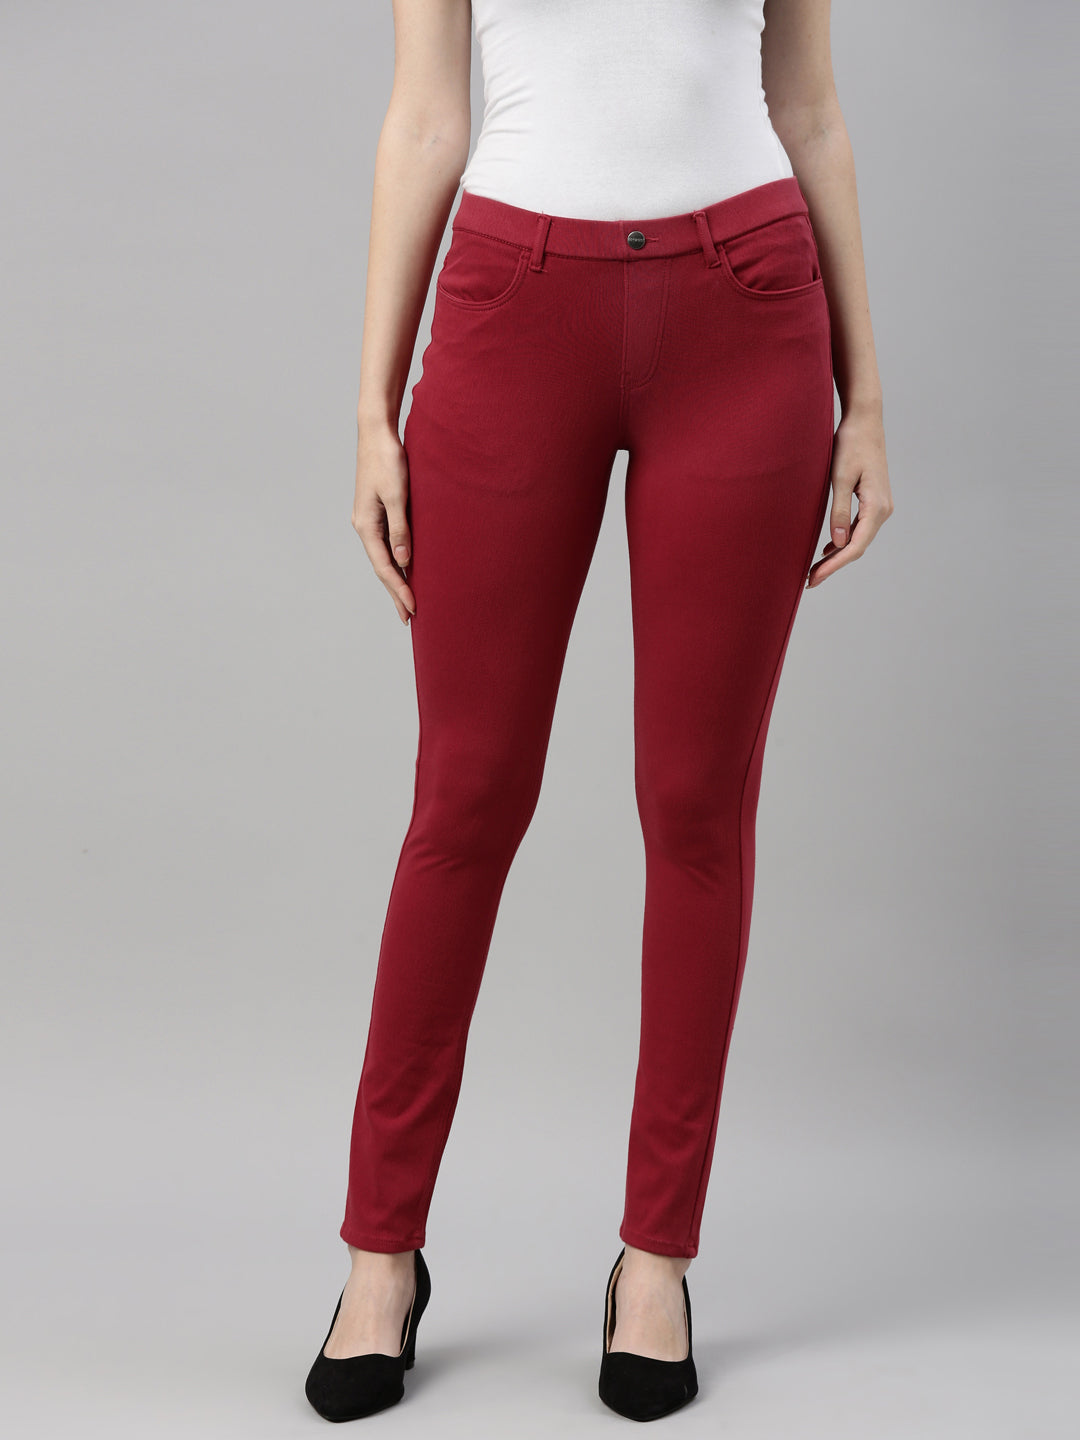 ZXN Clothing Light Blue Jegging Price in India - Buy ZXN Clothing Light  Blue Jegging online at